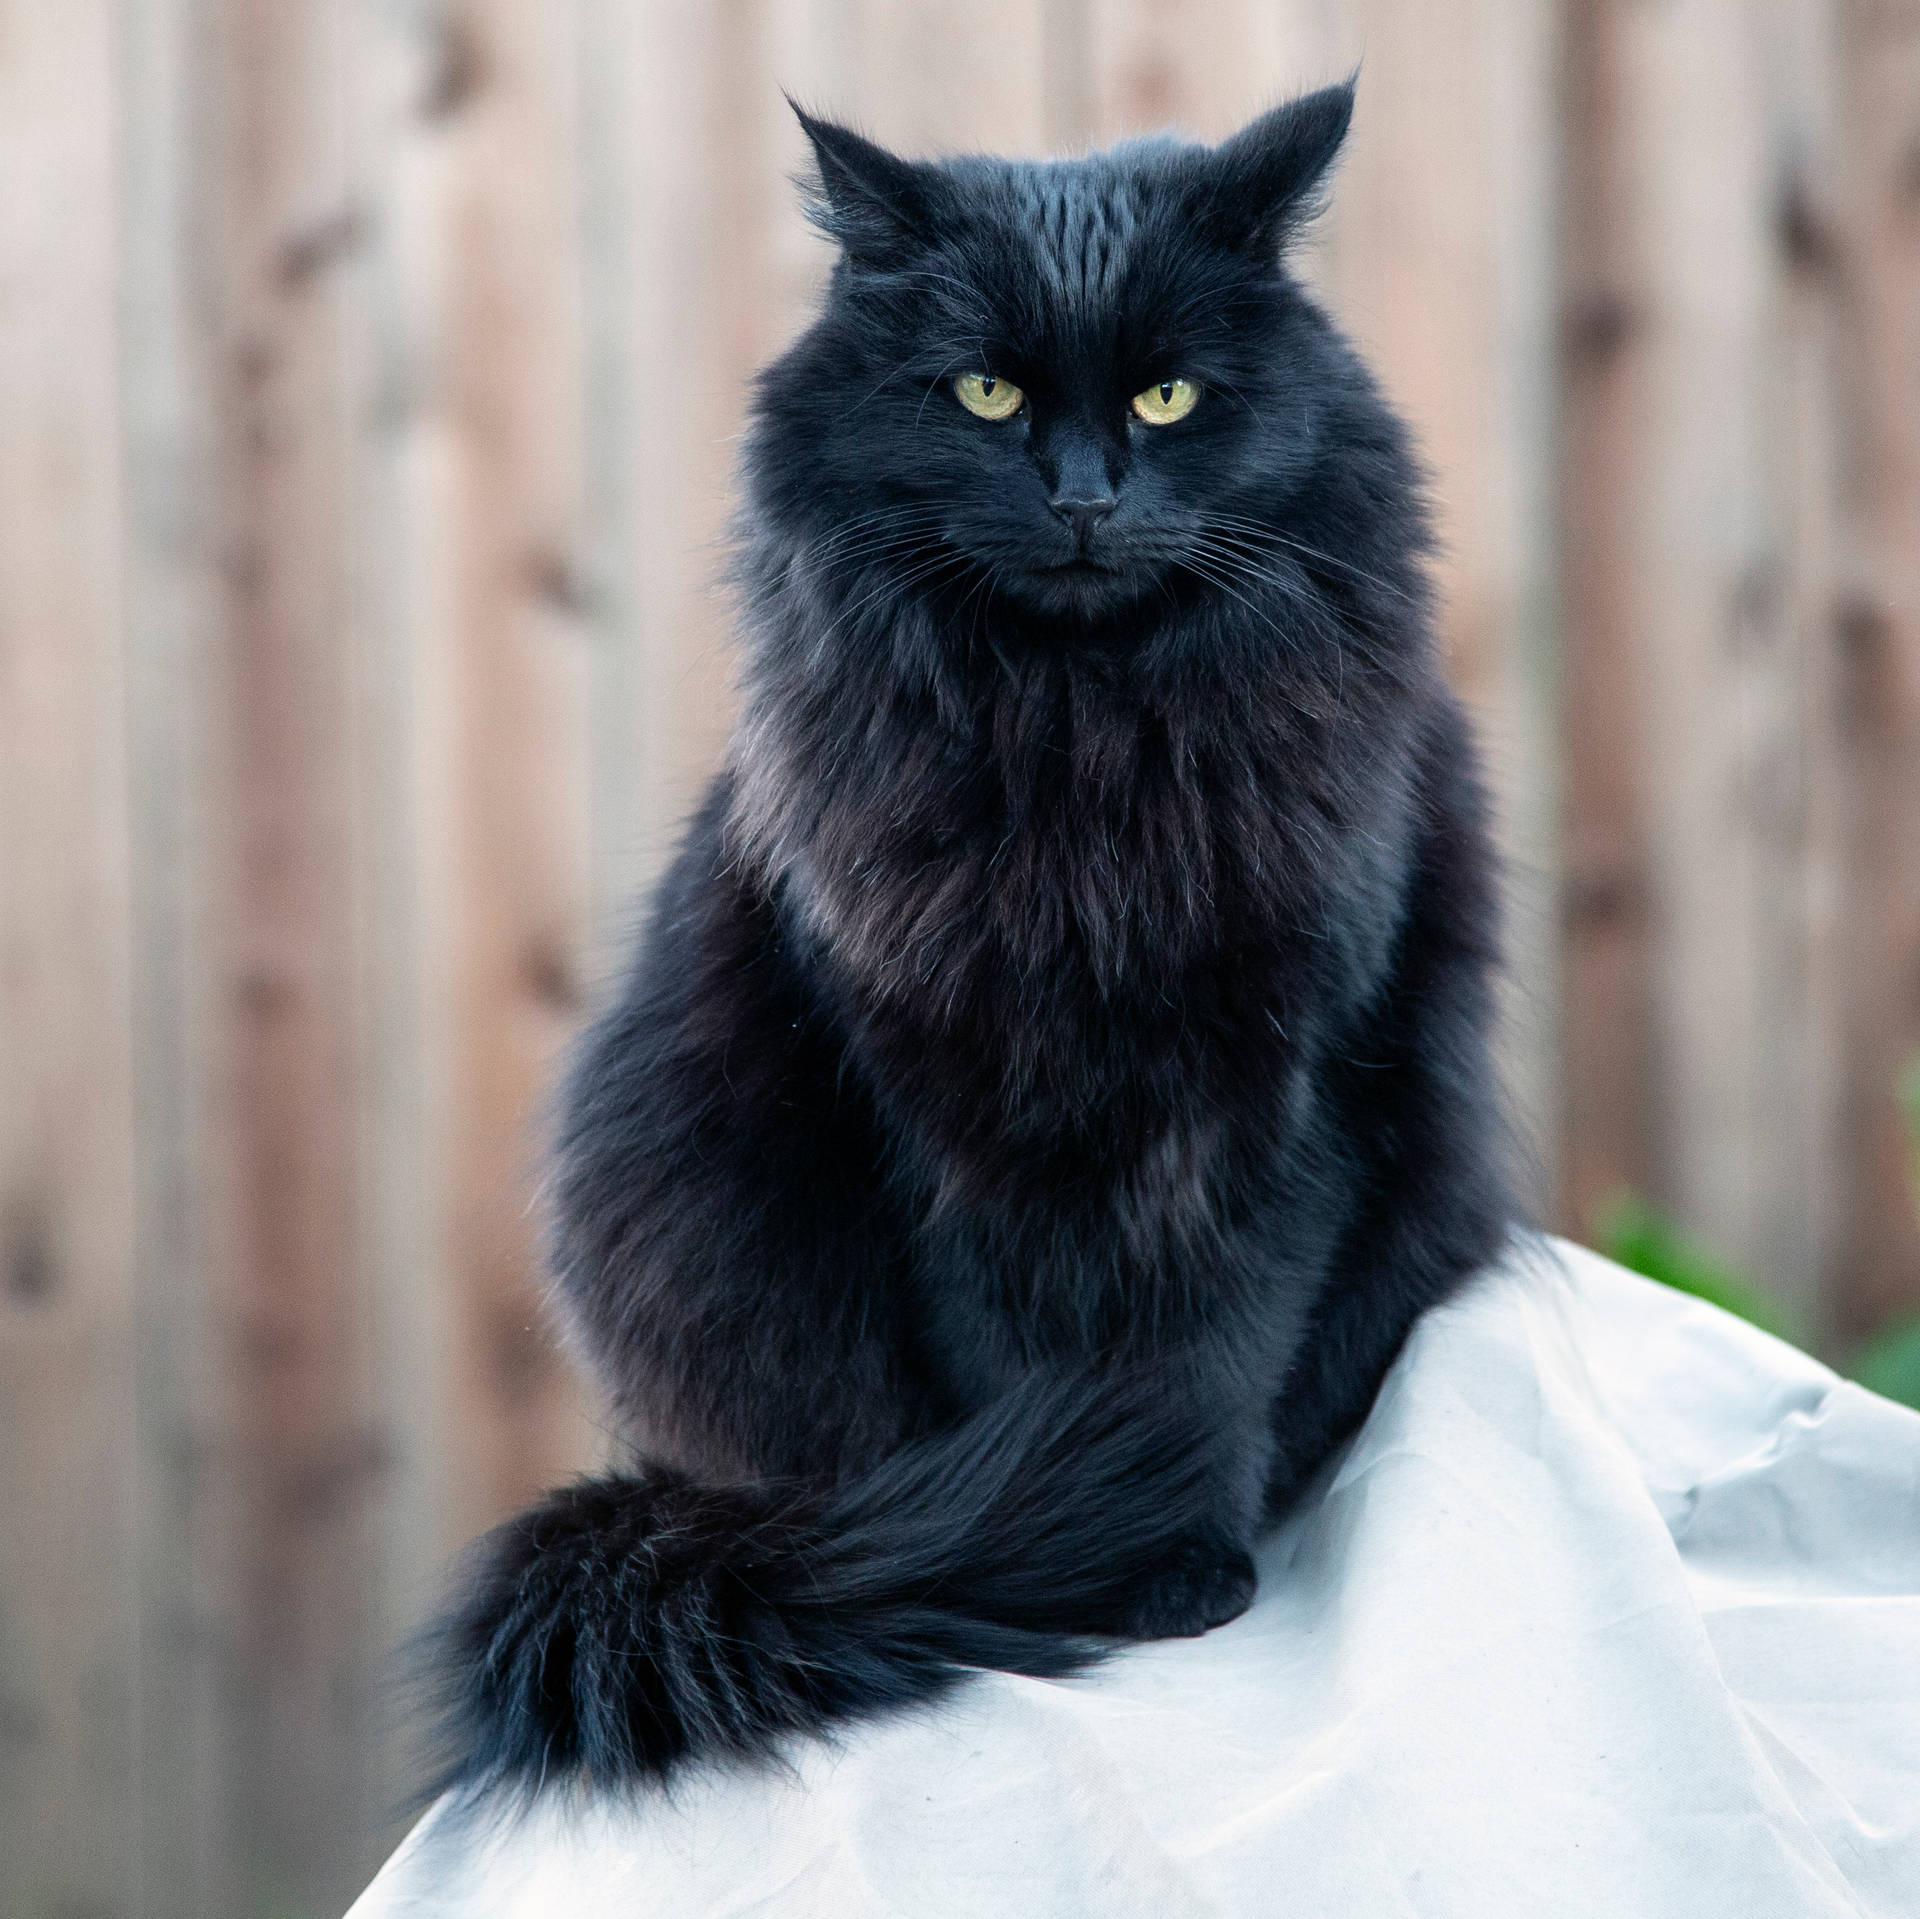 Angry Black Fluffy Cat Wallpaper